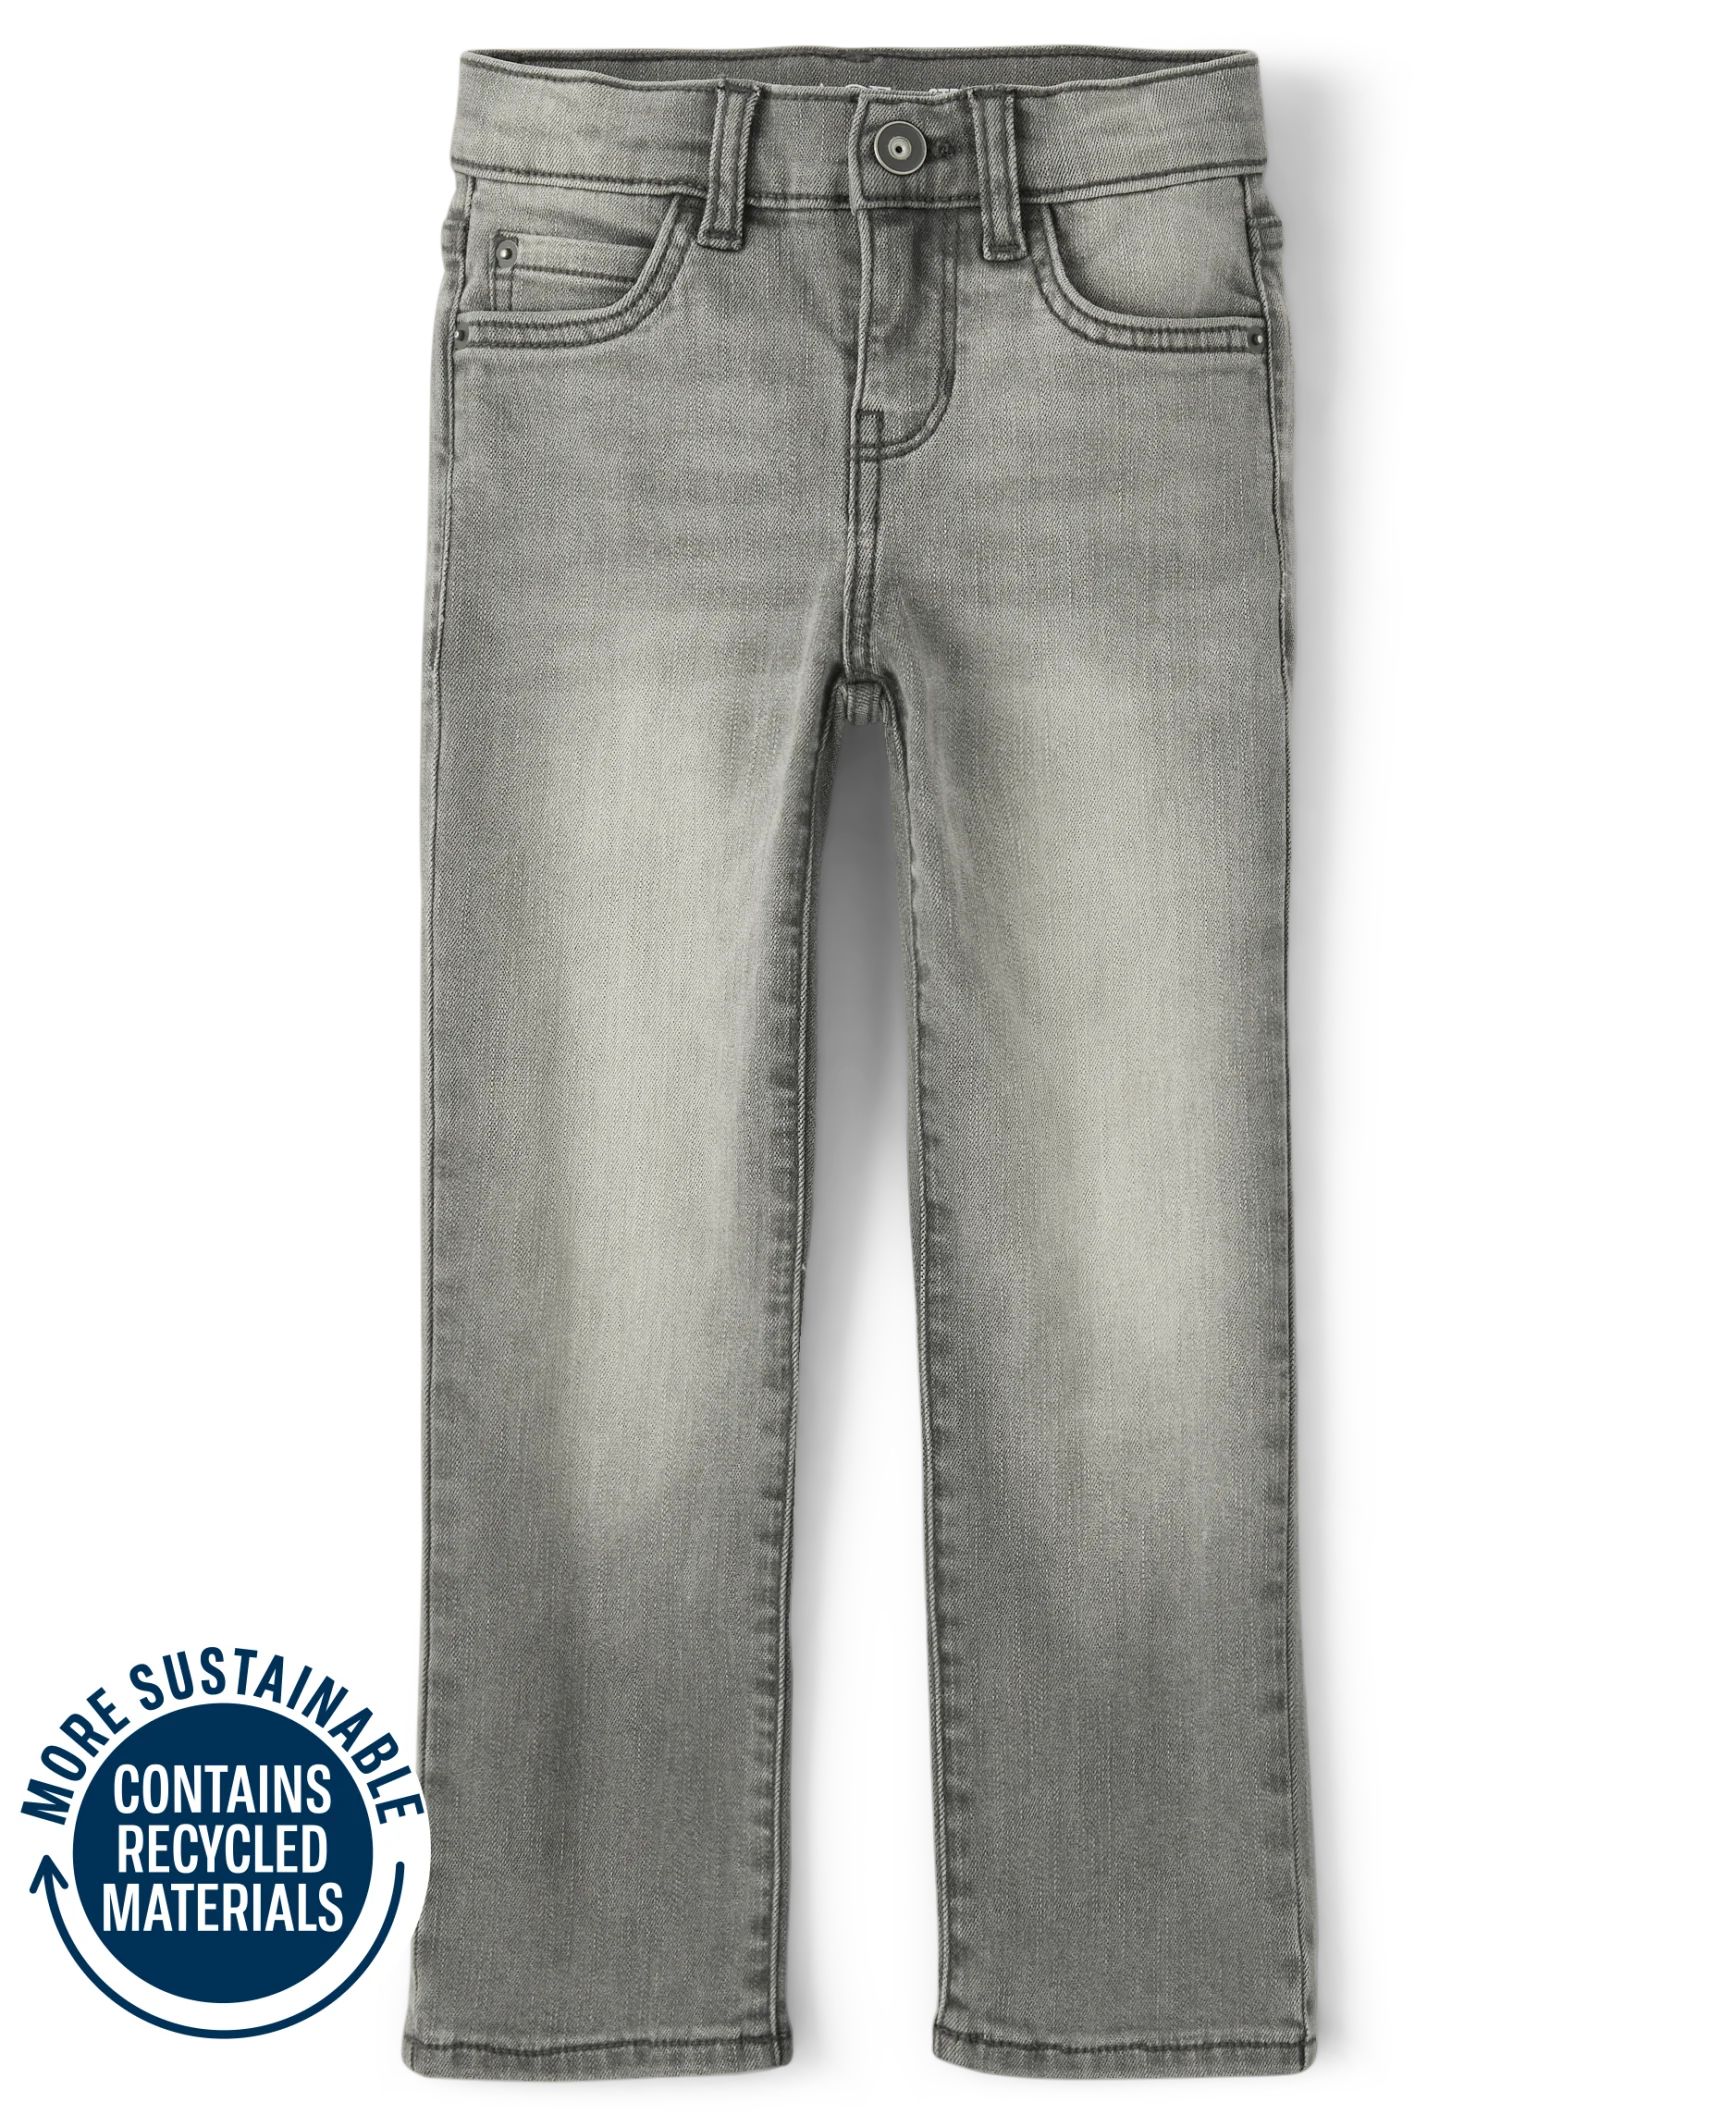 Boys Basic Stretch Straight Jeans - grey wash | The Children's Place